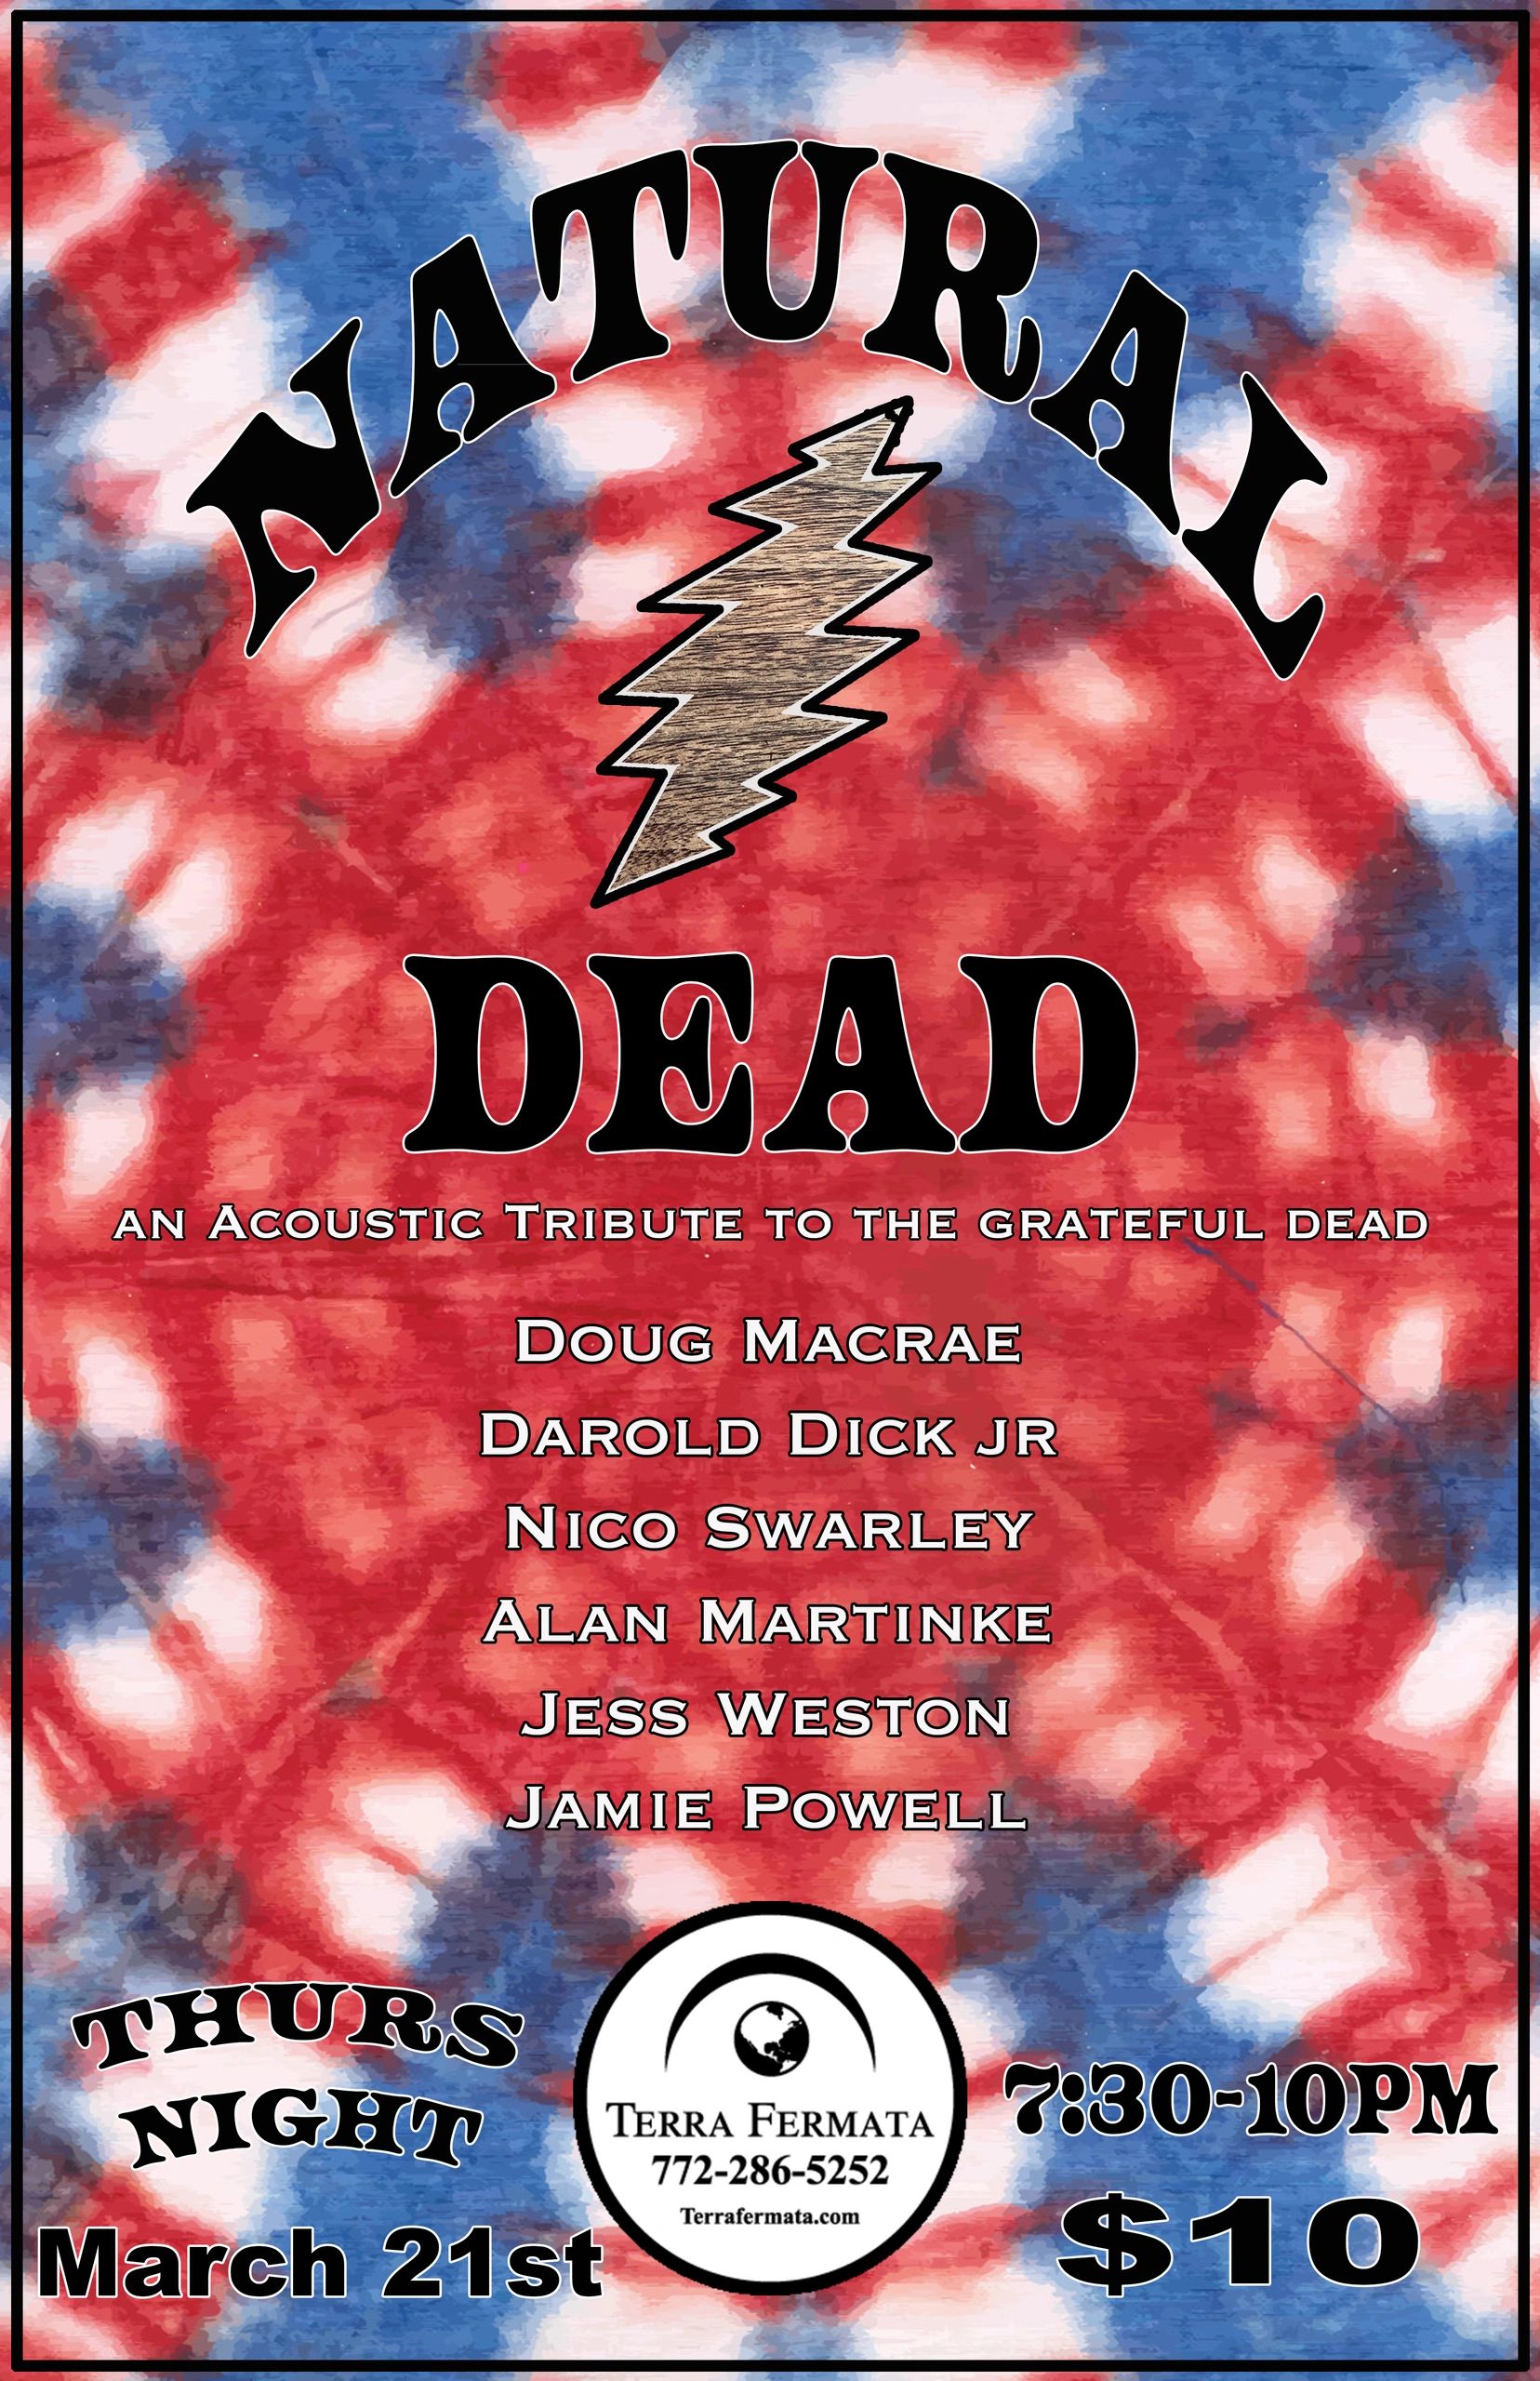 Natural Dead is an acoustic tribute to the Grateful Dead that follows the same
recipe of instrumenta